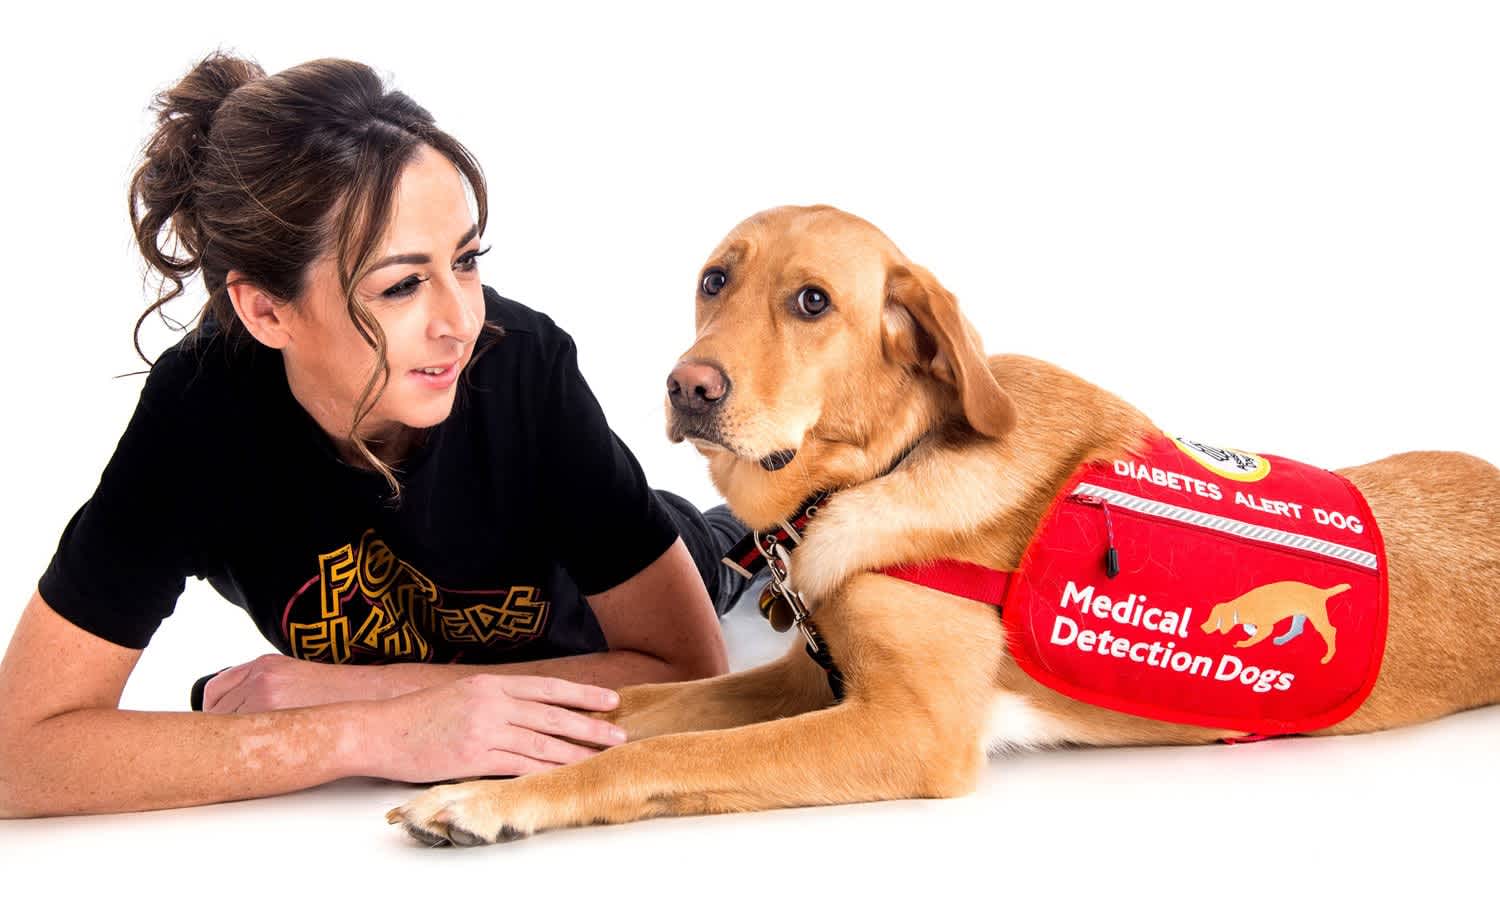 So far, Medical Detection Dogs have trained over 130 amazing canines for people with life-threatening conditions